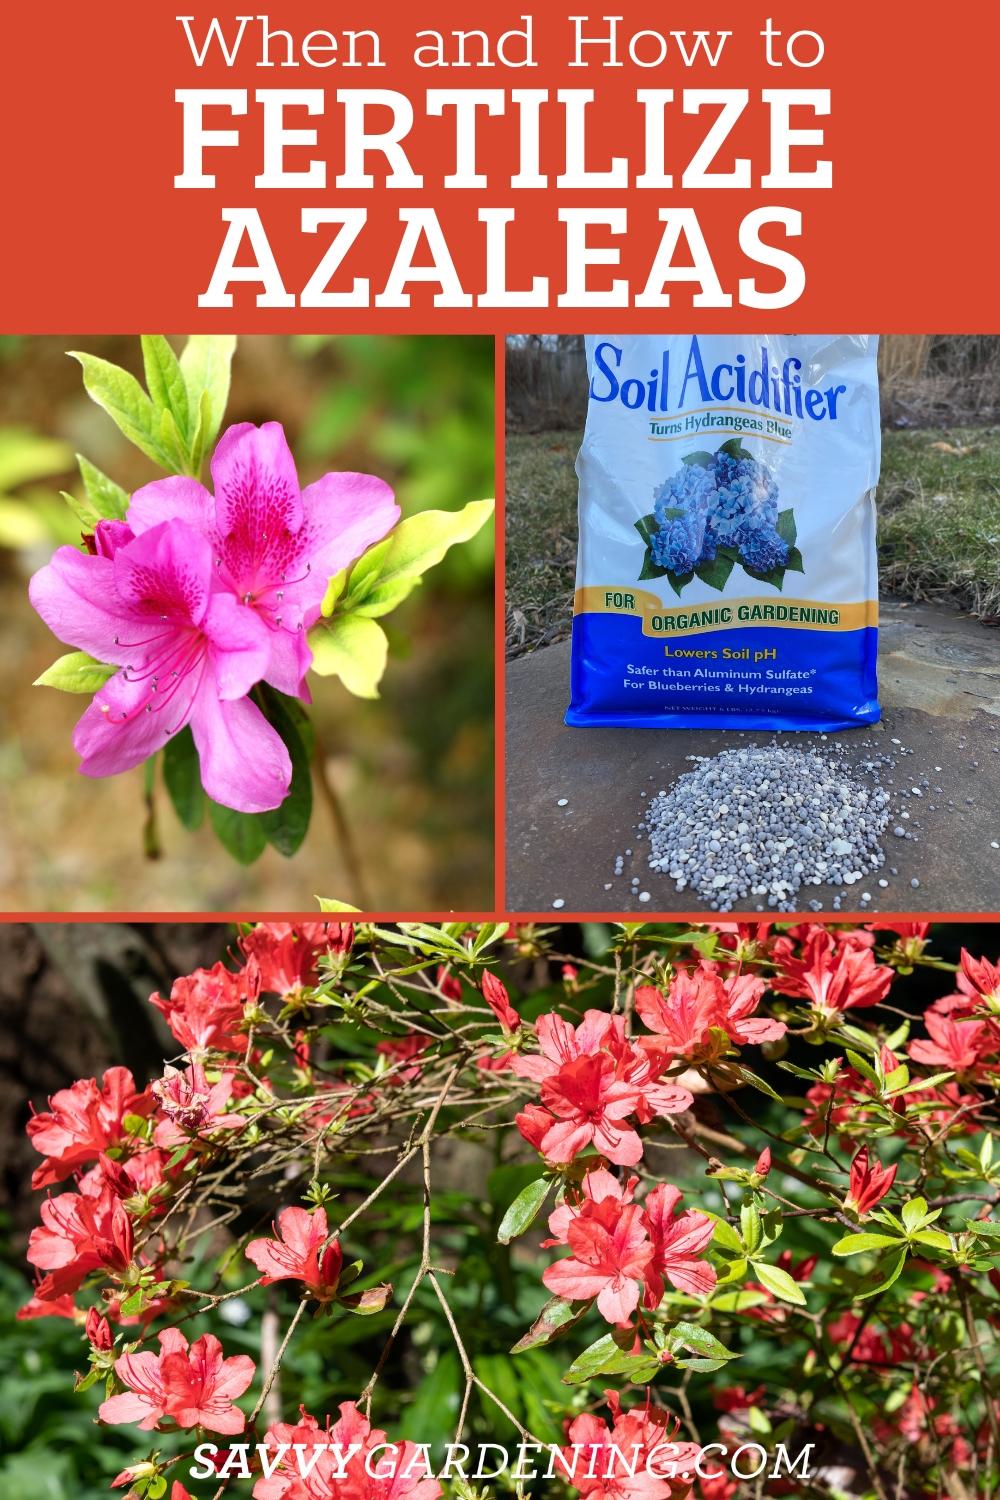 How and When to Fertilize Azaleas for Optimum Blooms